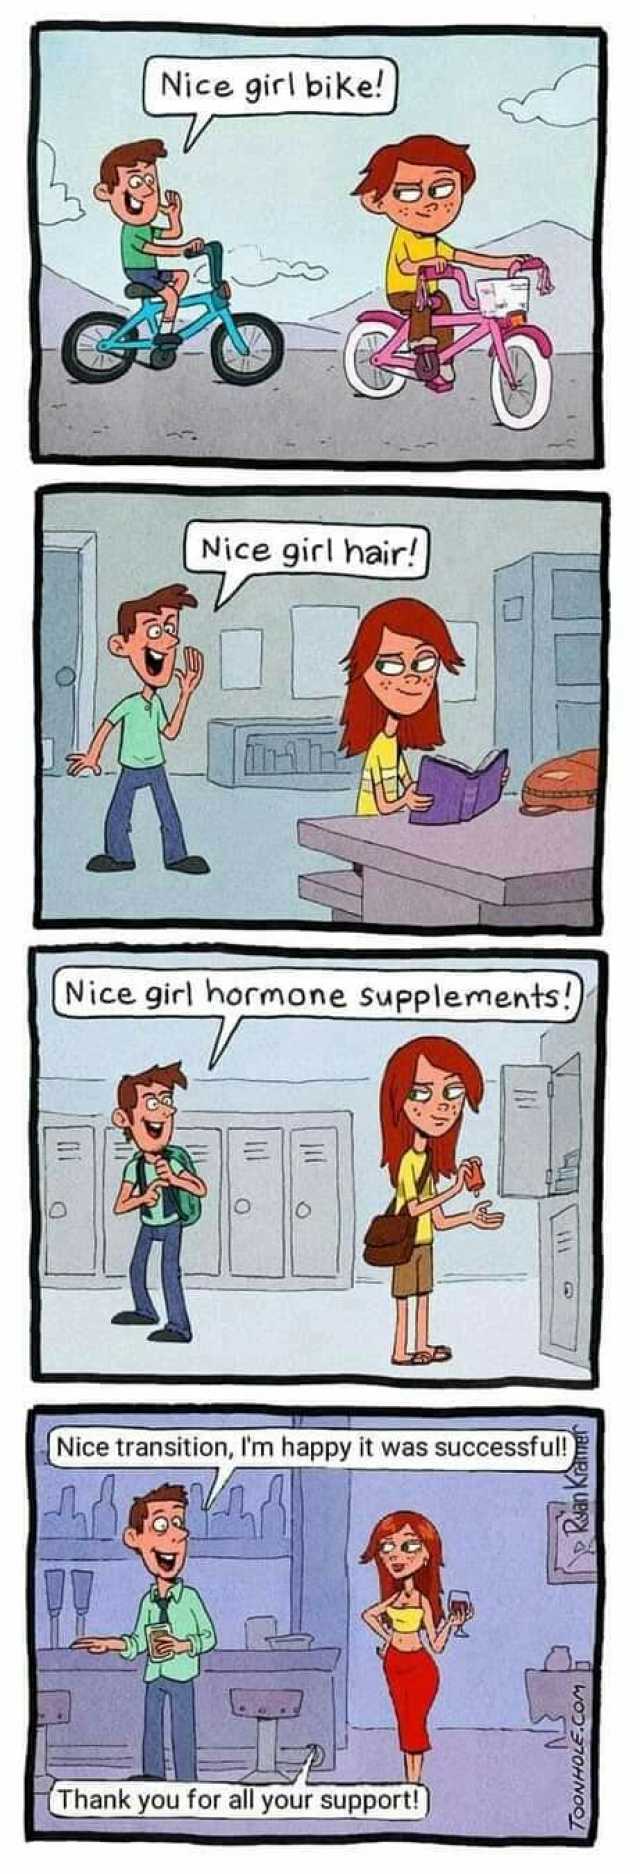 Nice girl bike! Nice girl hair! Nice girl hormone supplements Nice transition Im happy it was successful! Thank you for all your support!